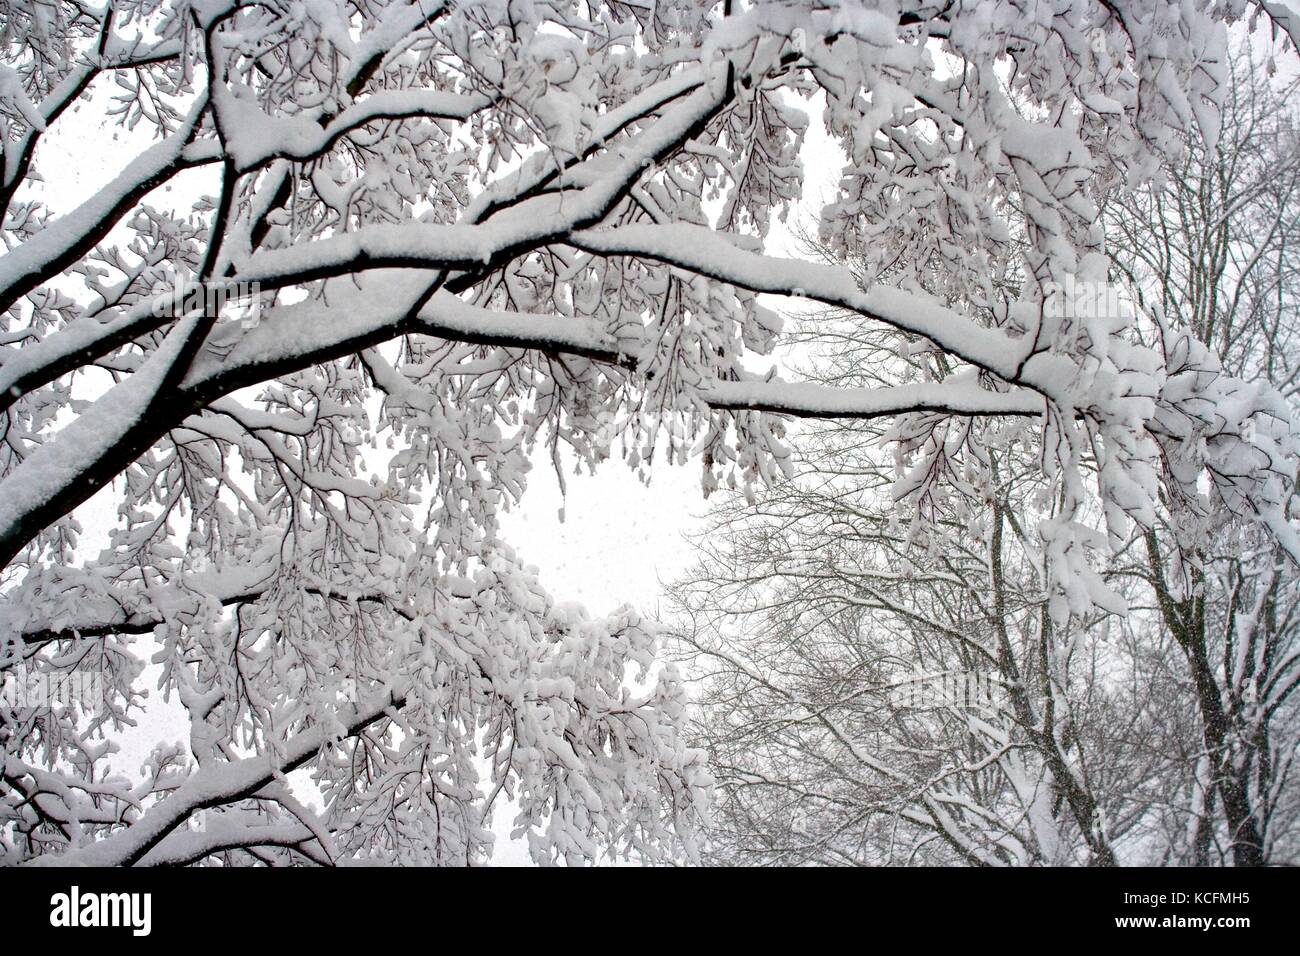 Thick snow covers tree branches following a blizzard. Stock Photo